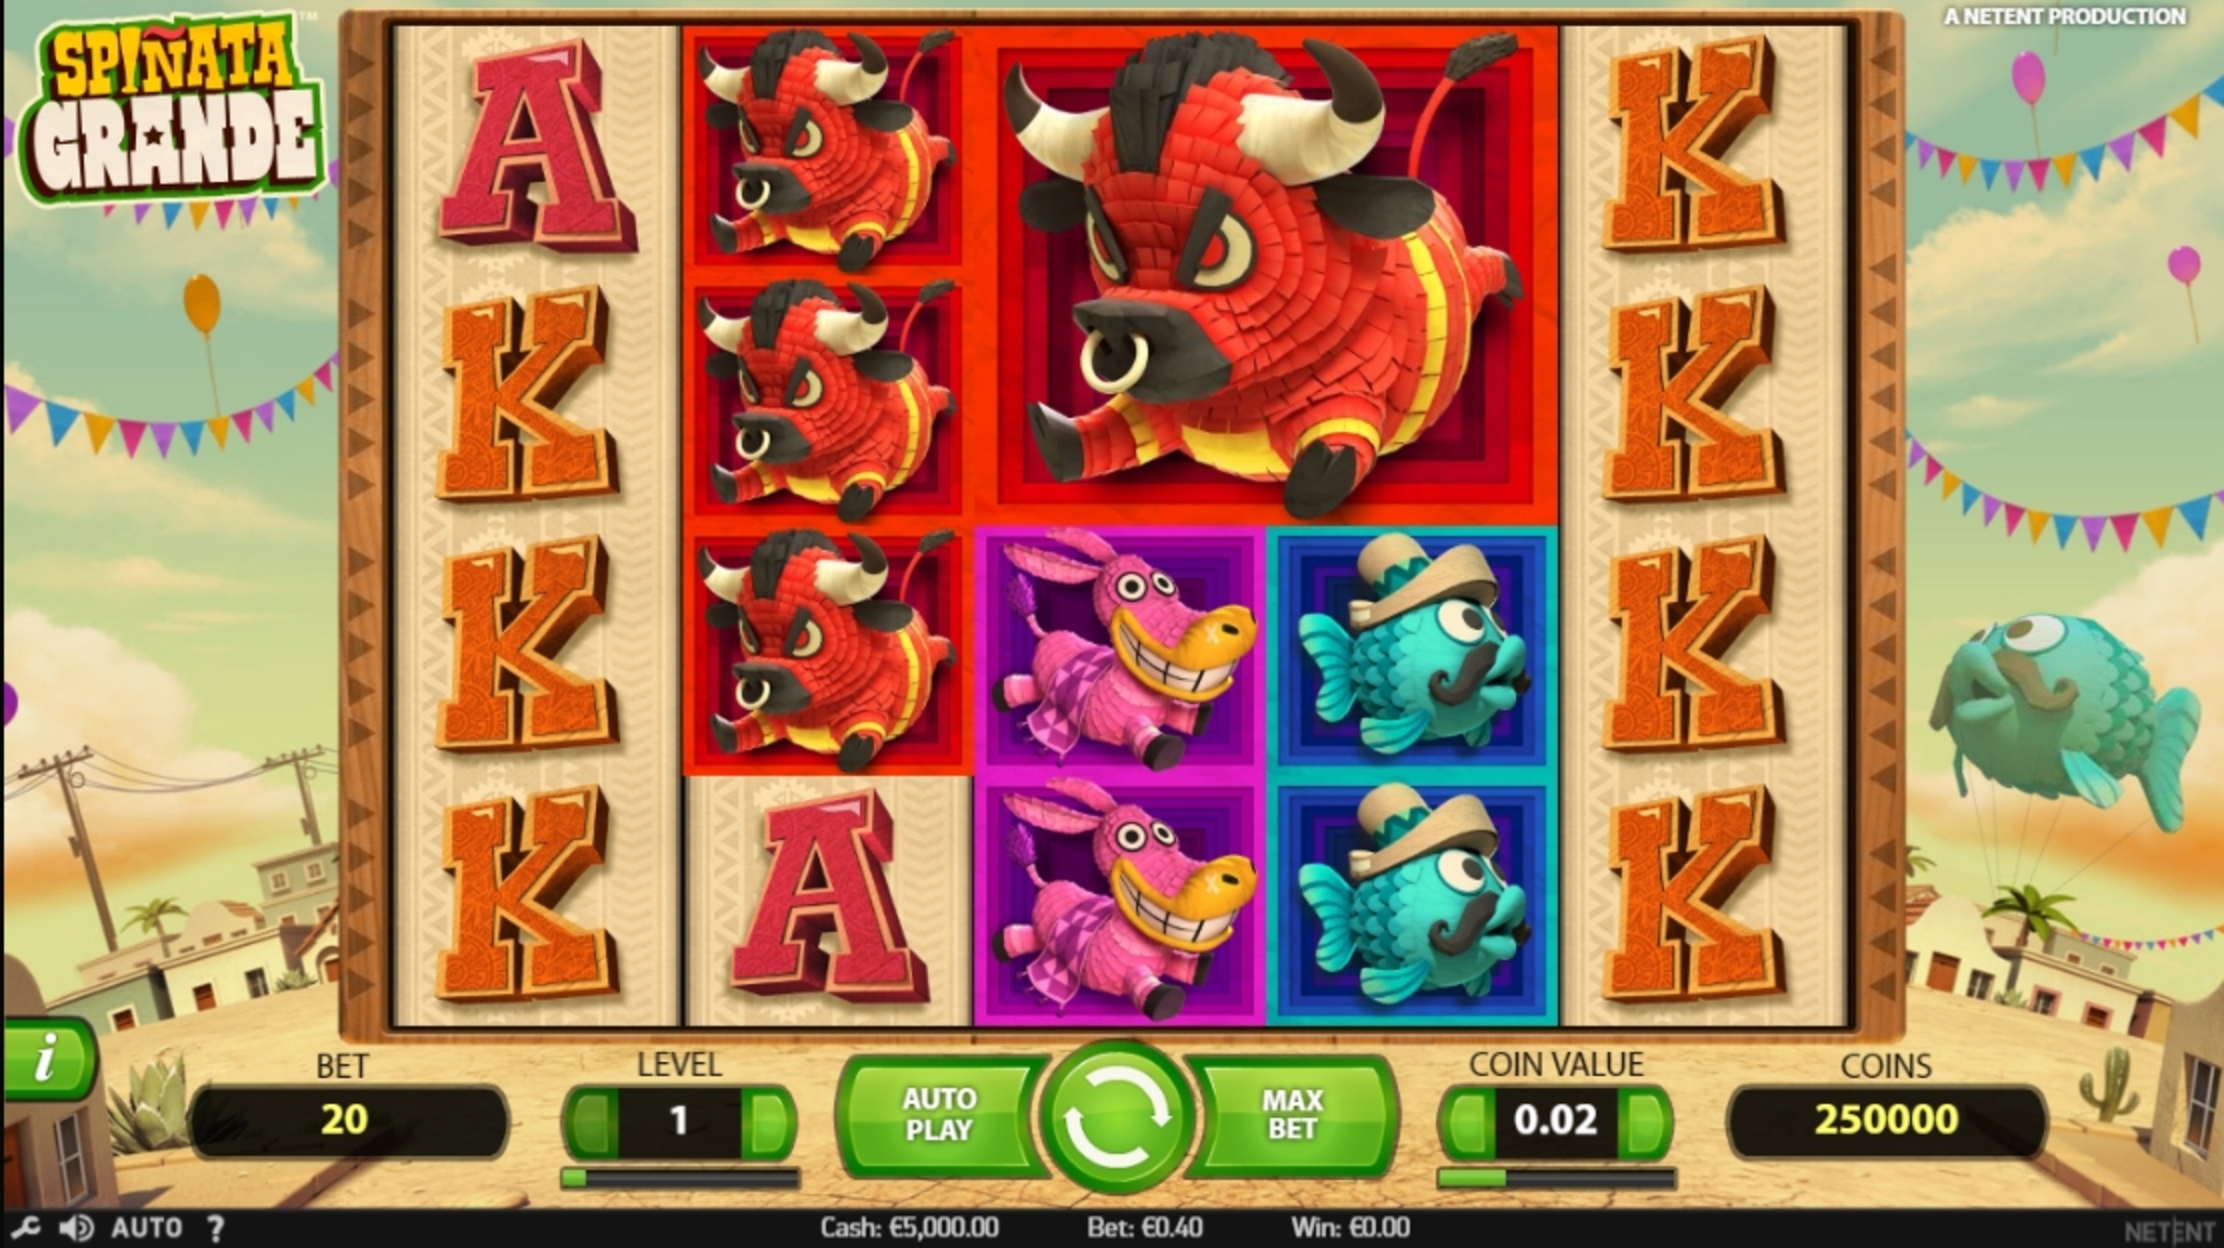 Reels in Spinata Grande Slot Game by NetEnt